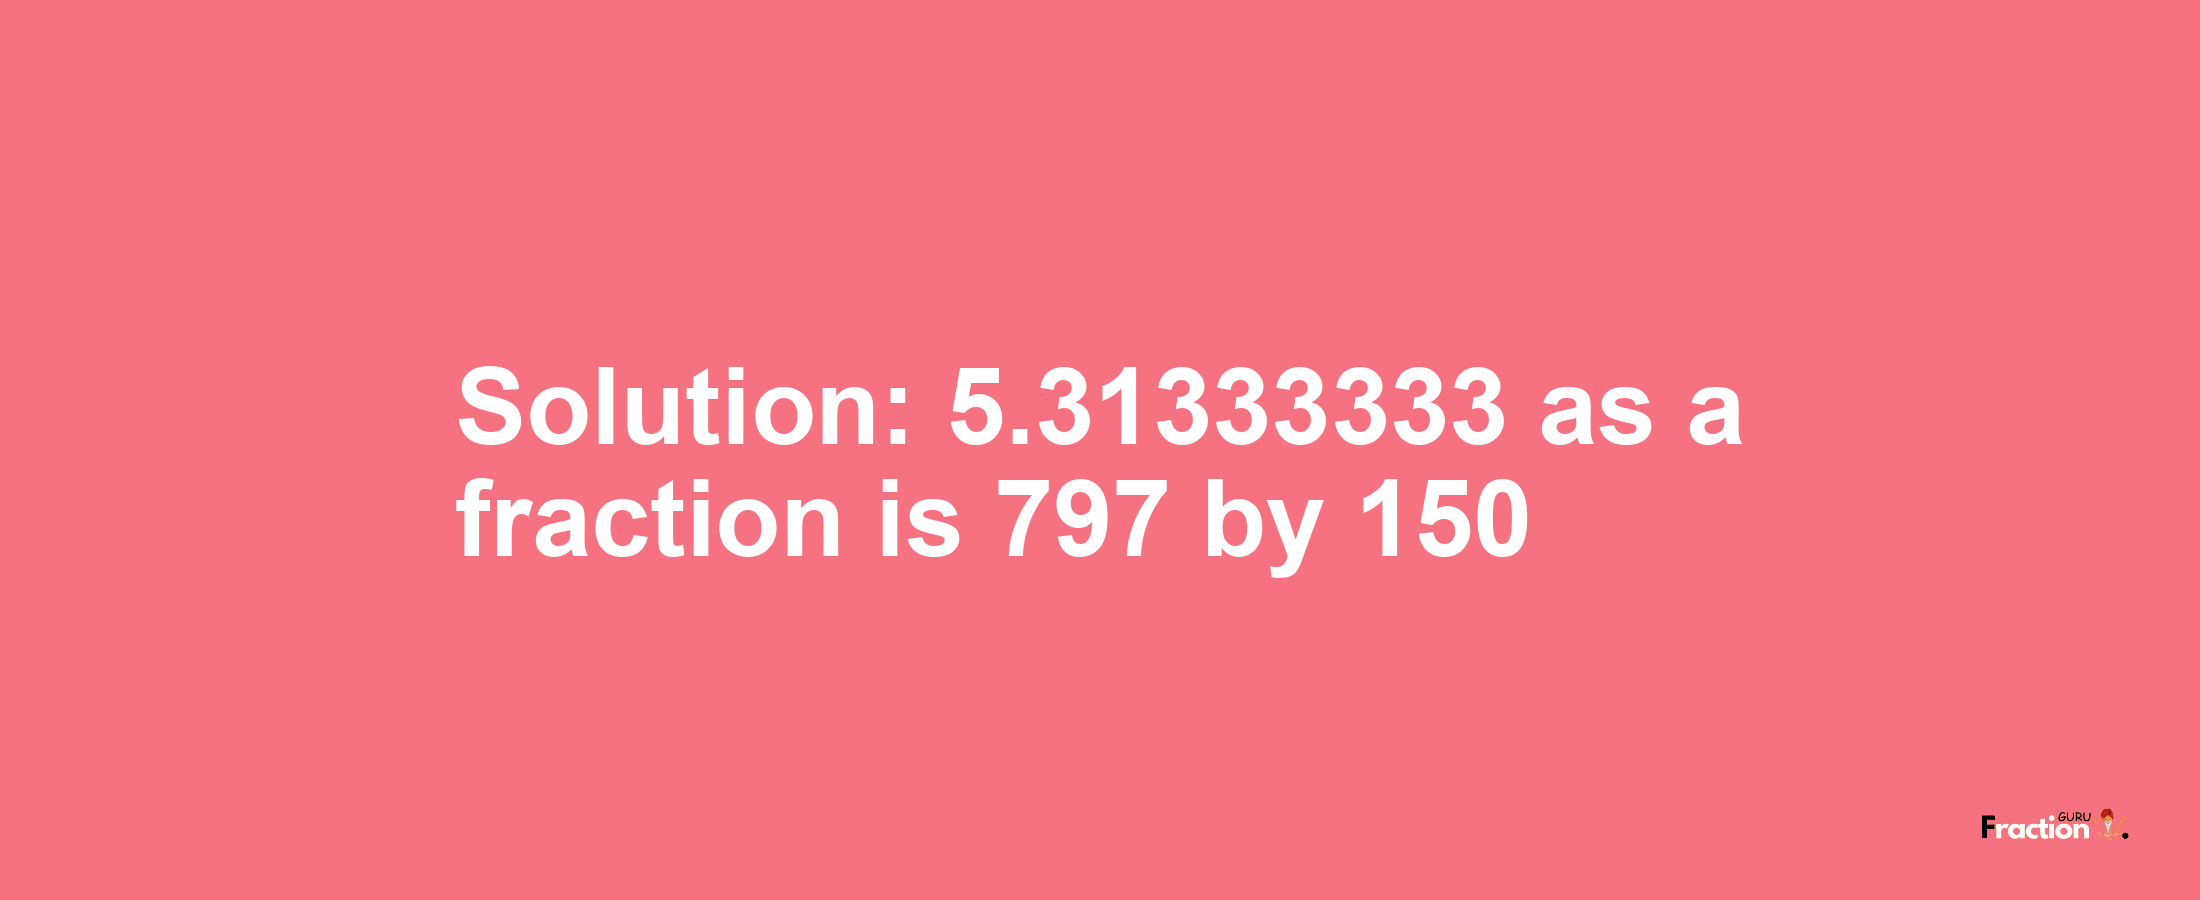 Solution:5.31333333 as a fraction is 797/150